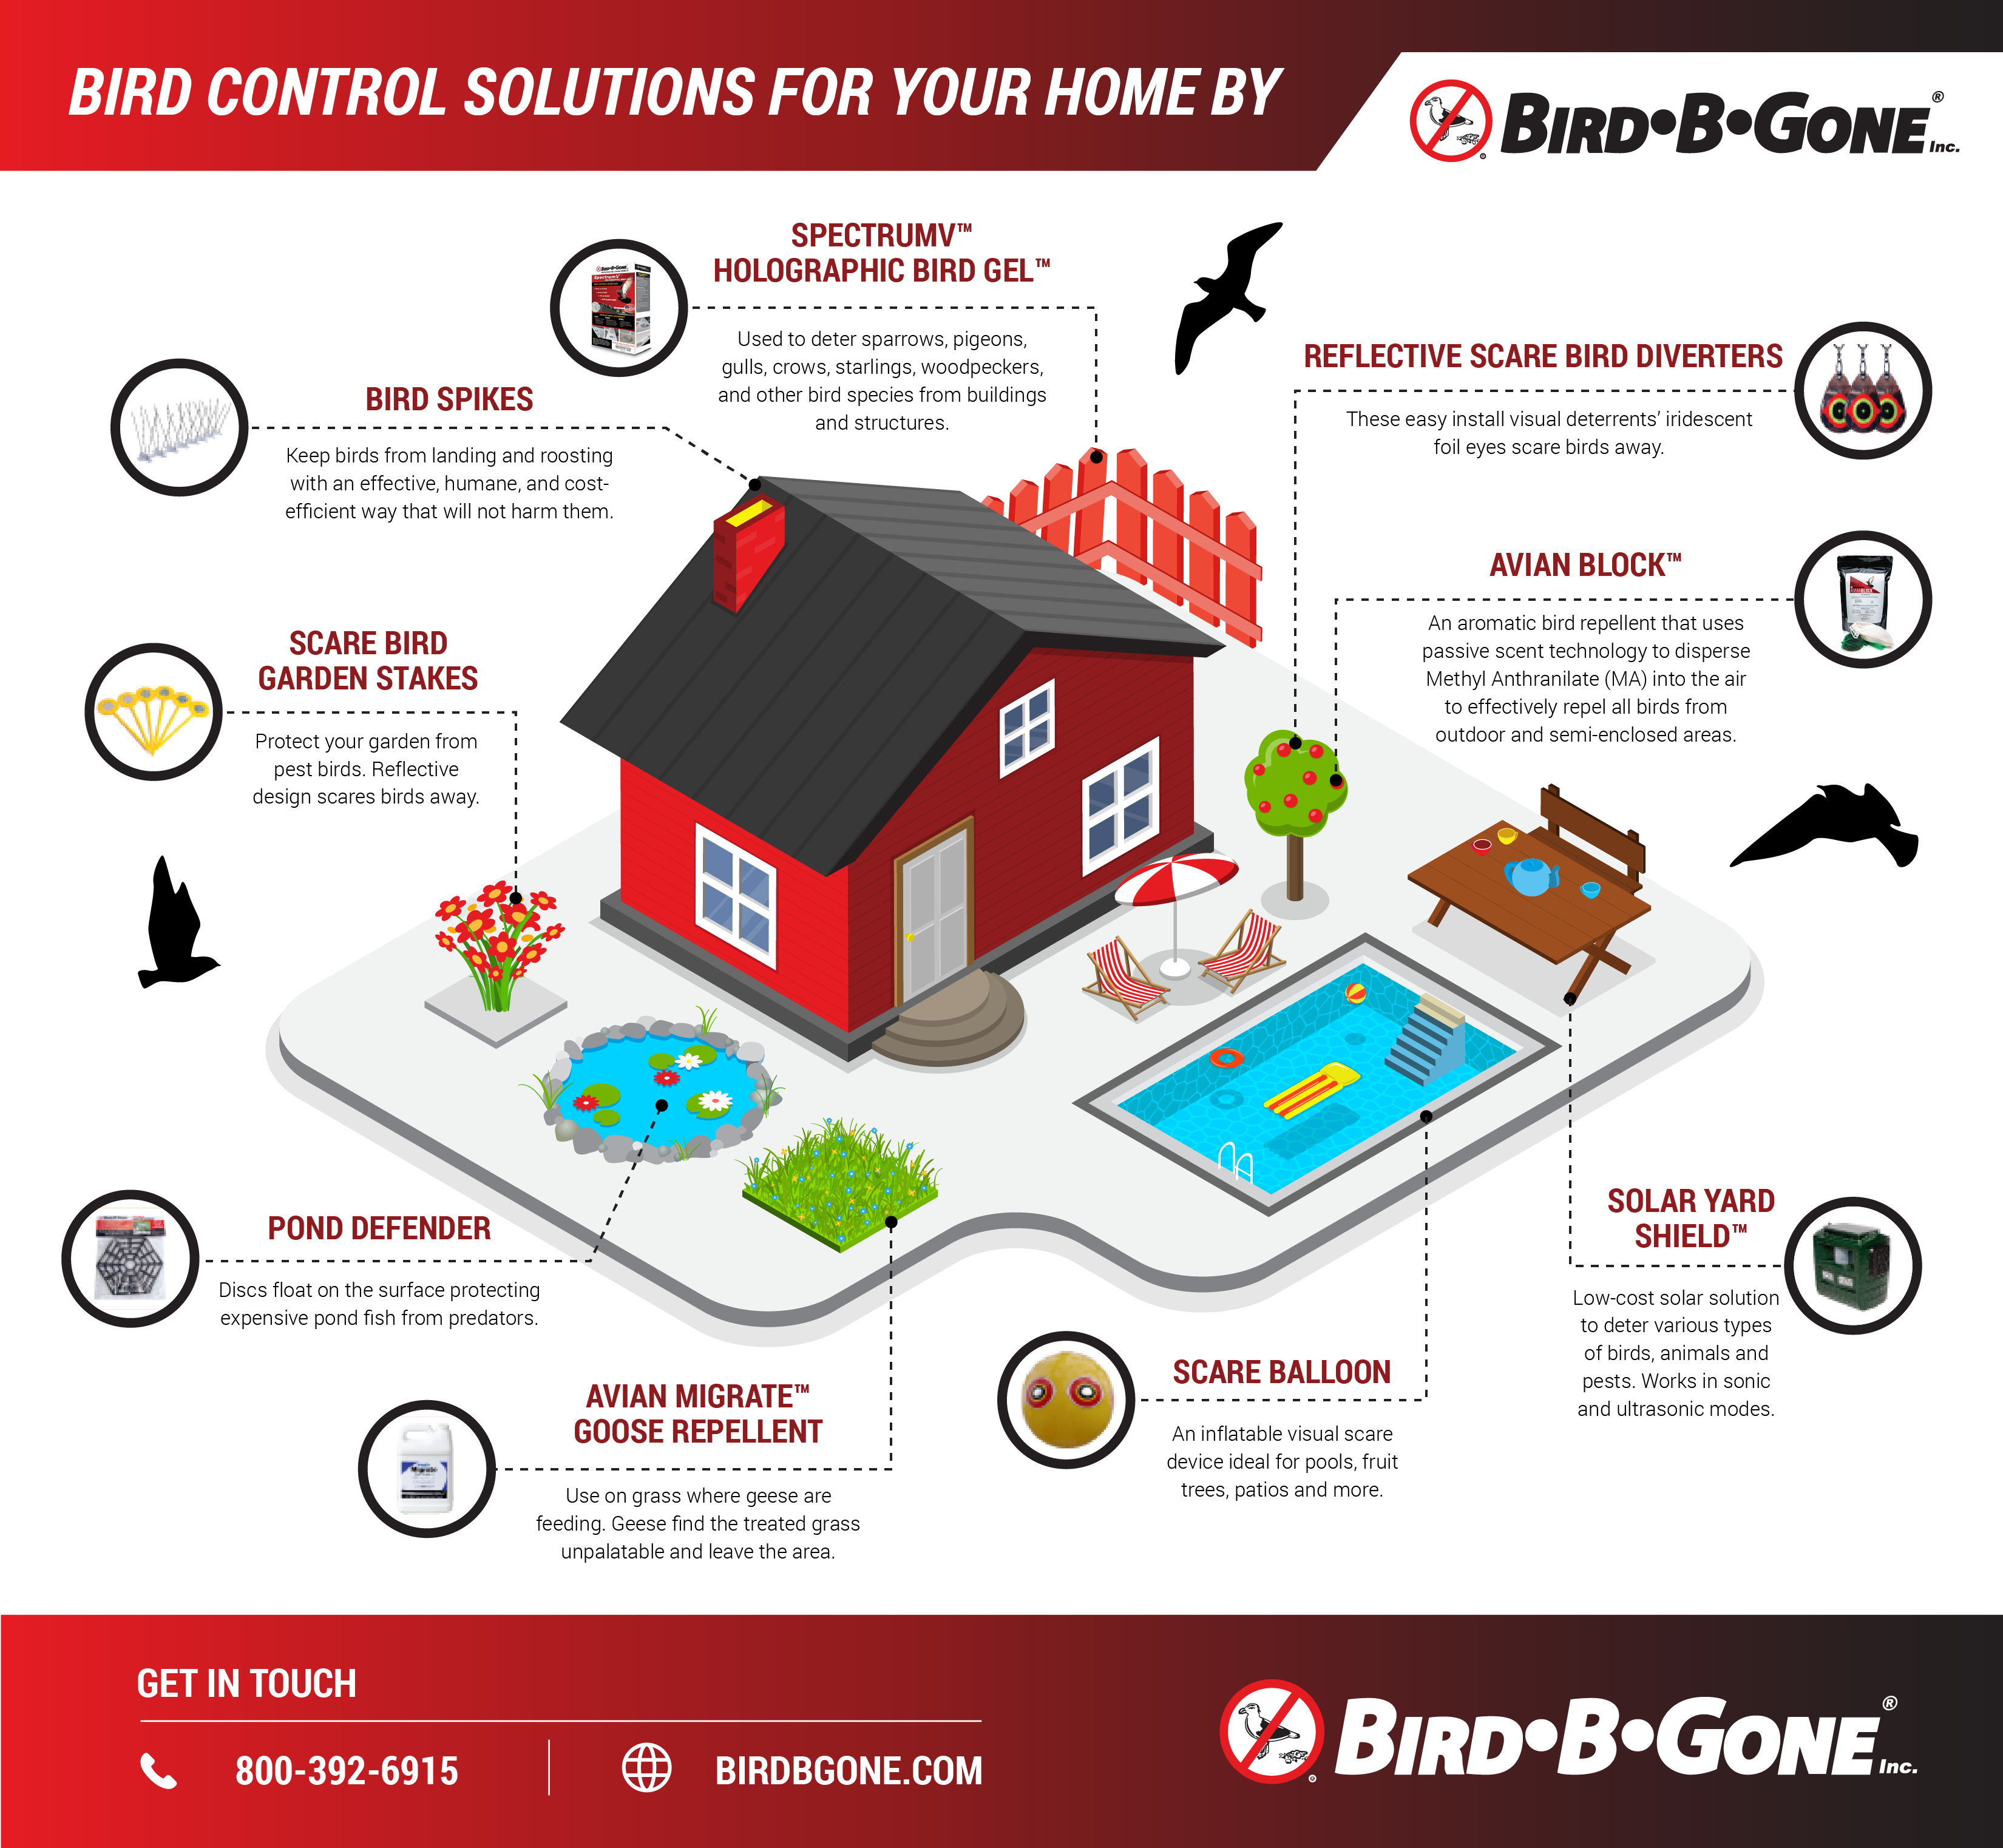 Bird control solutions for birds nesting on your home 